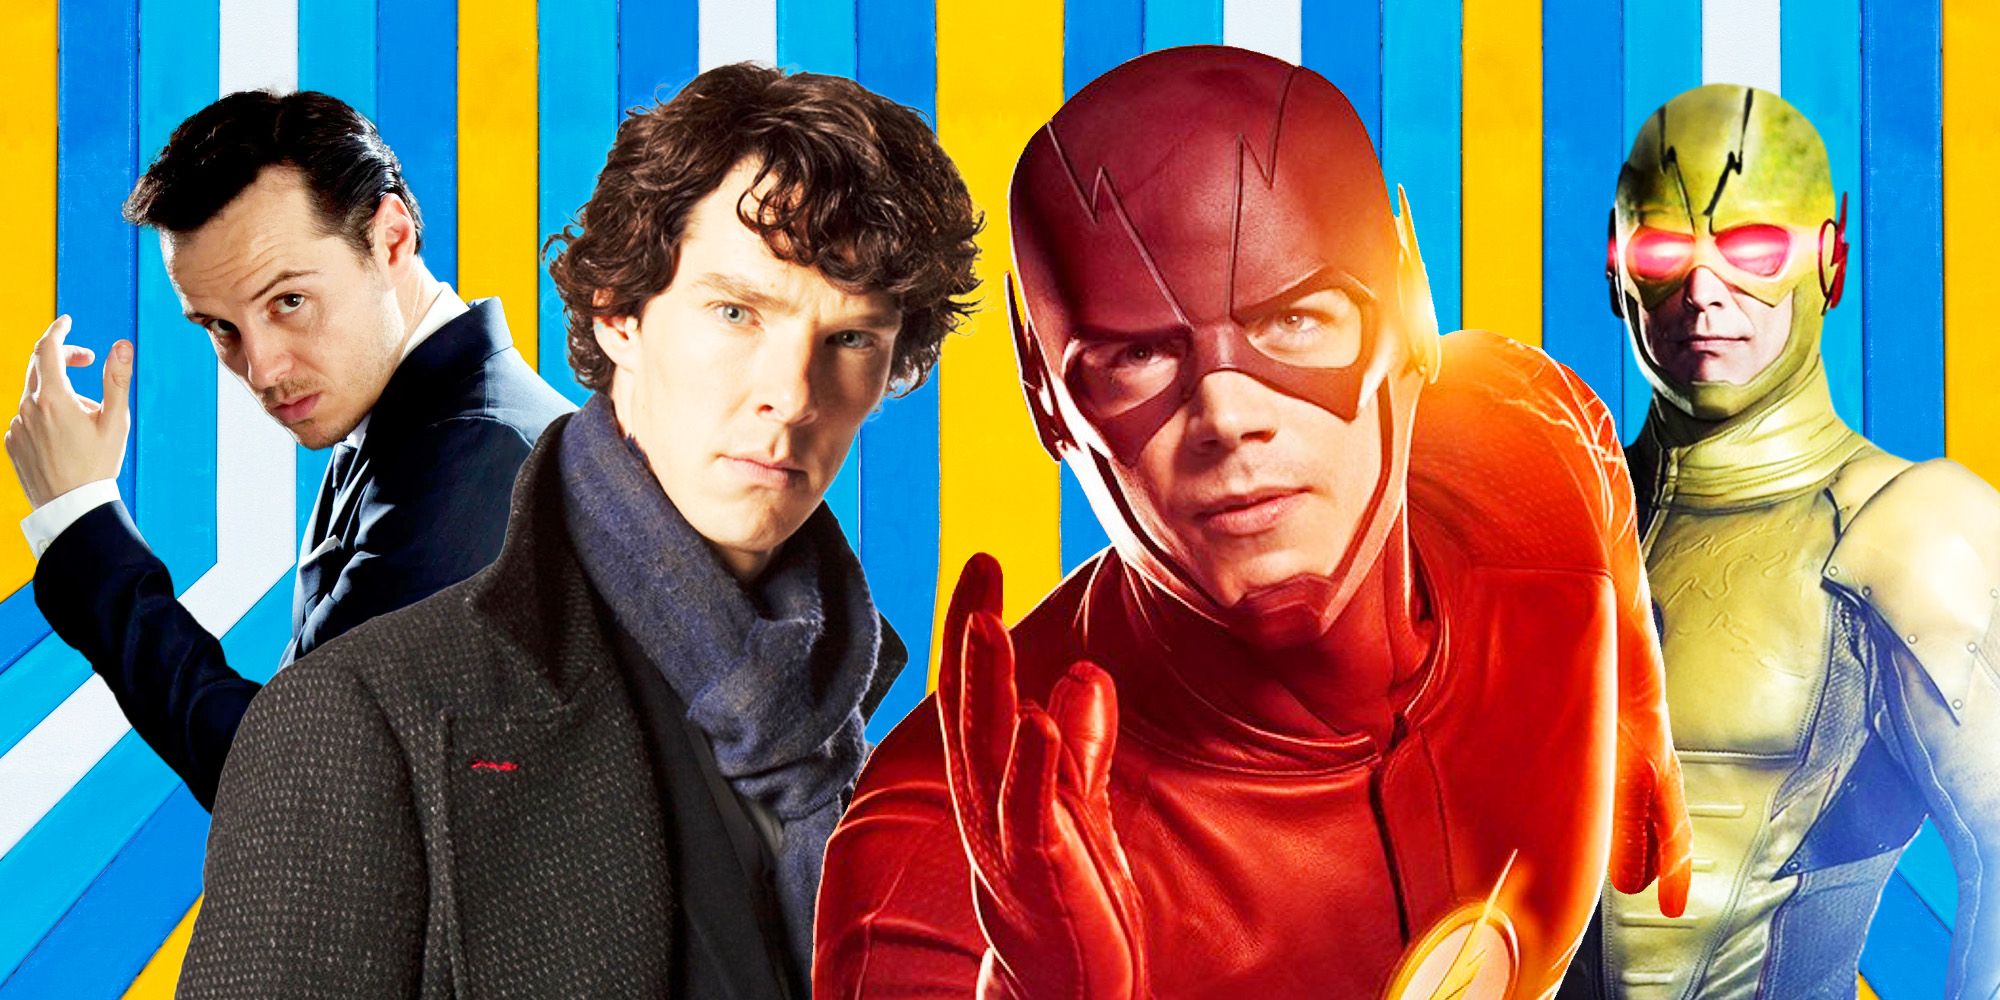 Sherlock and Moriarty from Sherlock, and Flash and Reverse Flash from The Flash CW